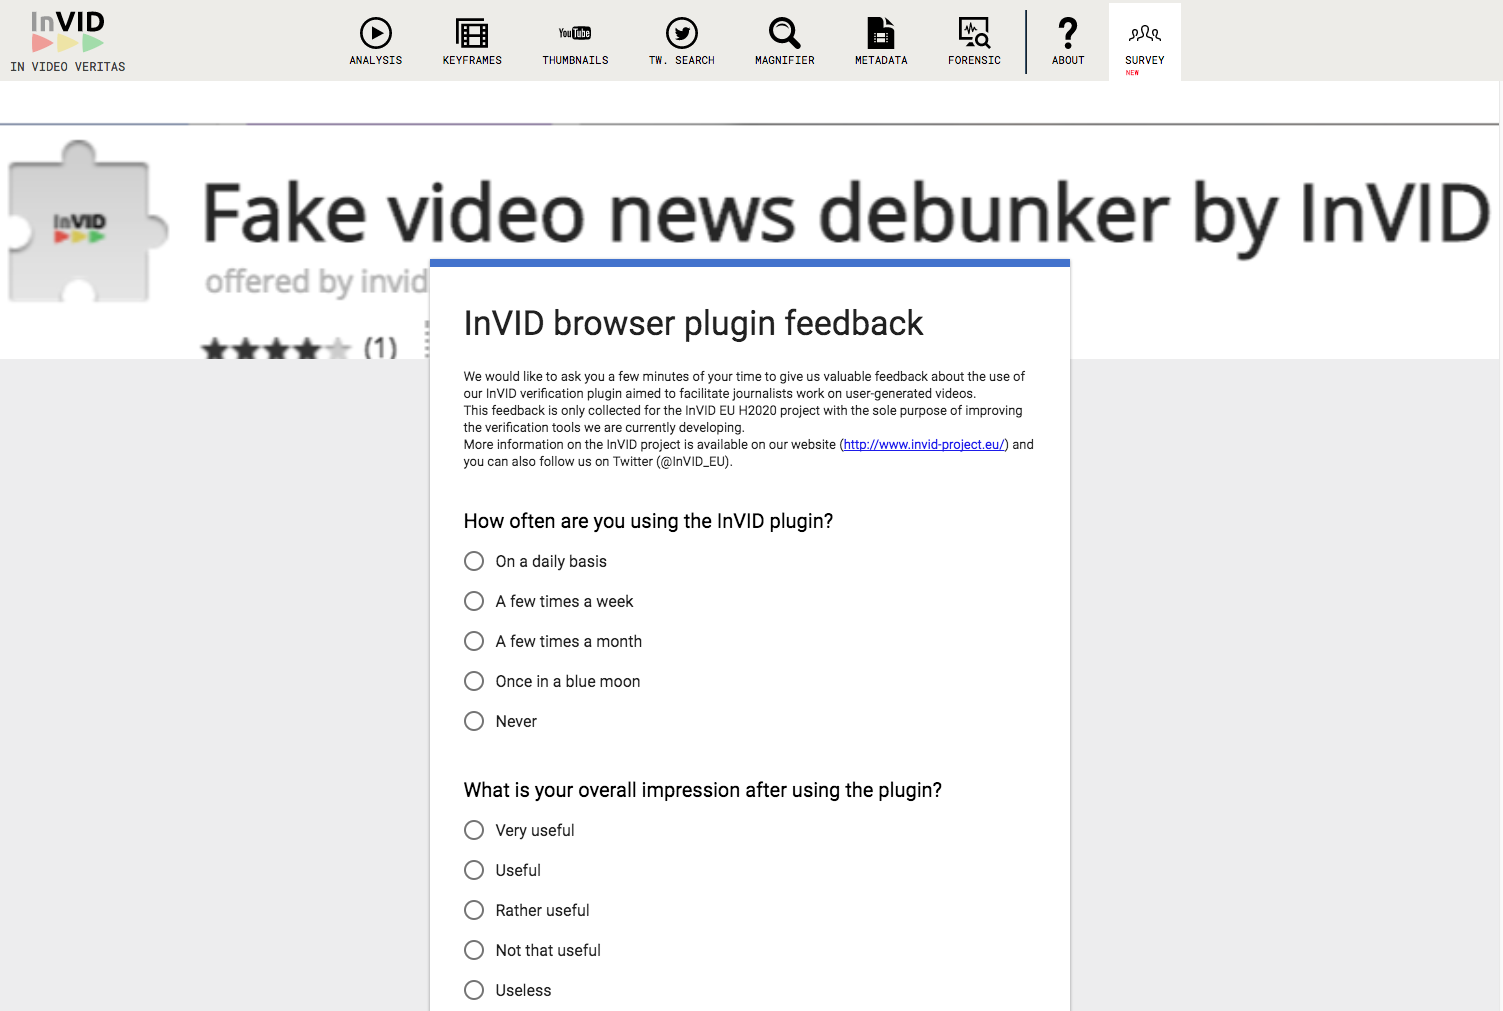 The integrated survey about the use of the InVID Verification Plugin